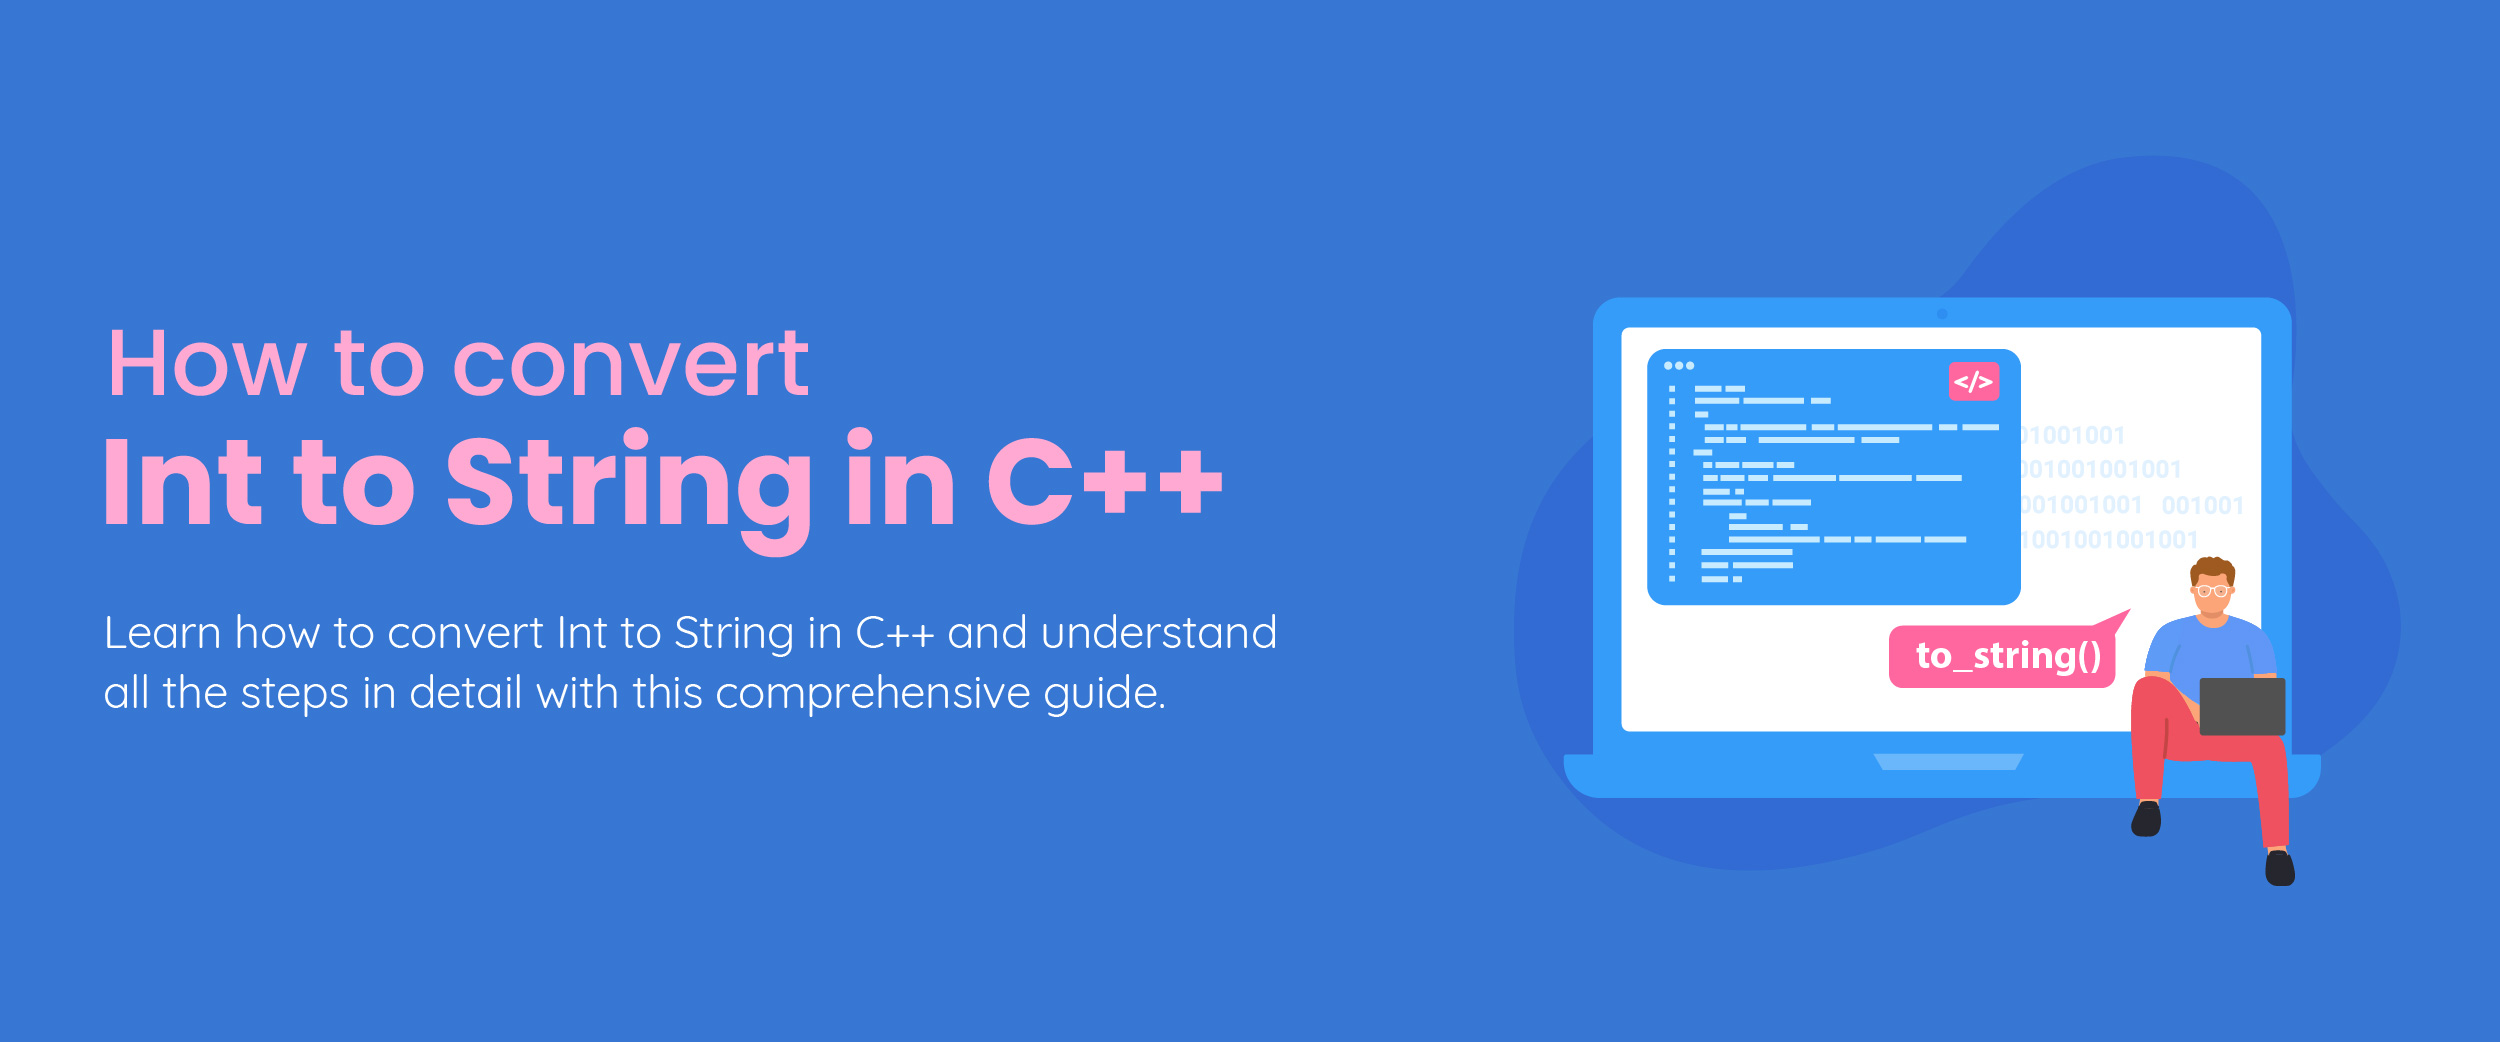 how to convert Int to String in C++